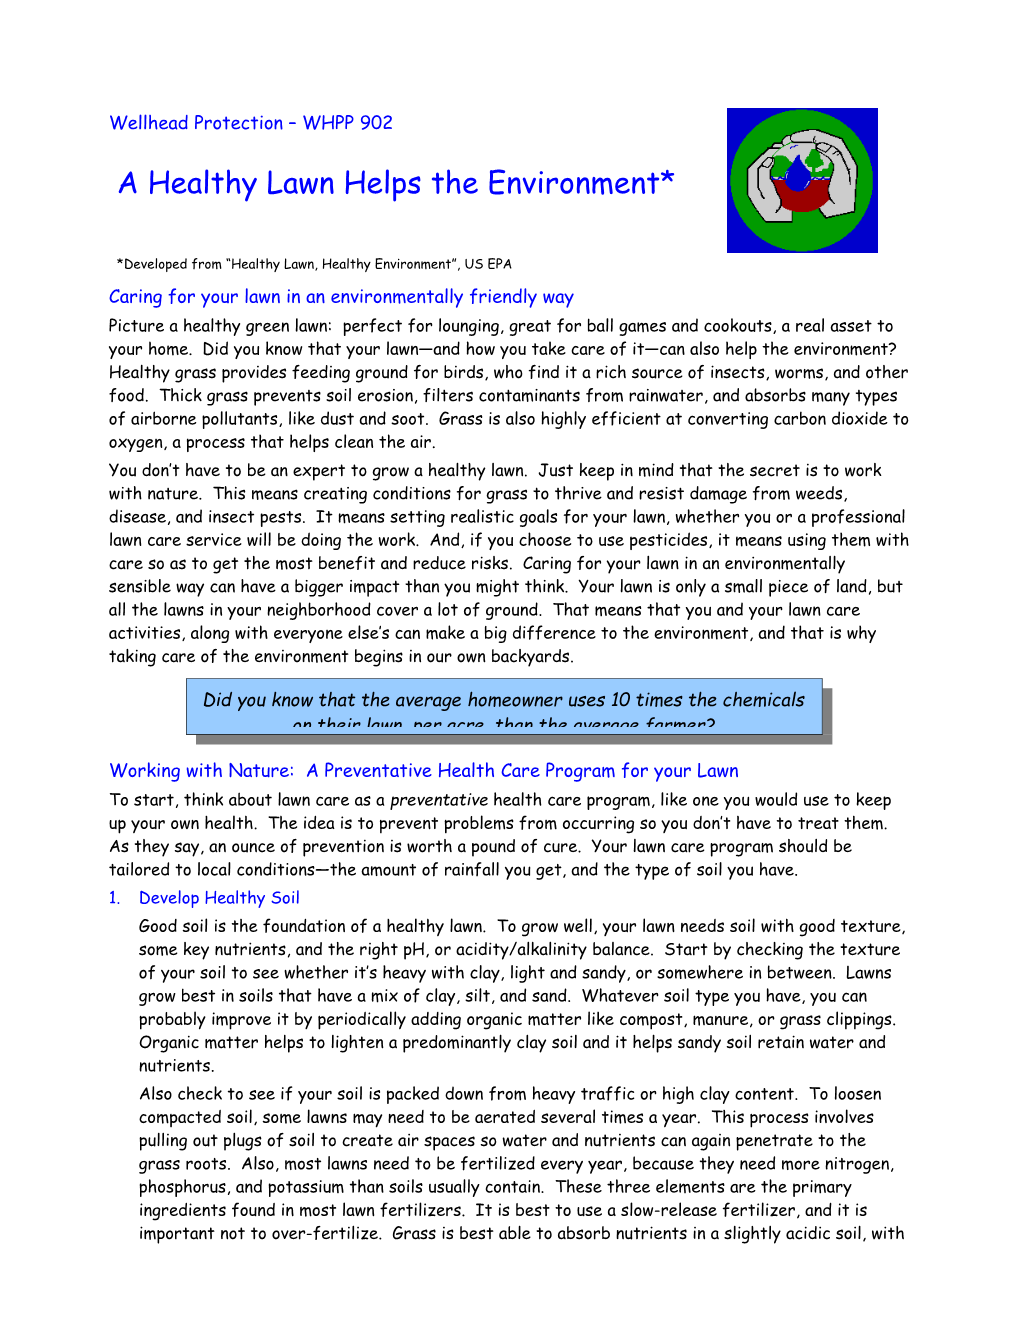 *Developed from Healthy Lawn, Healthy Environment , US EPA